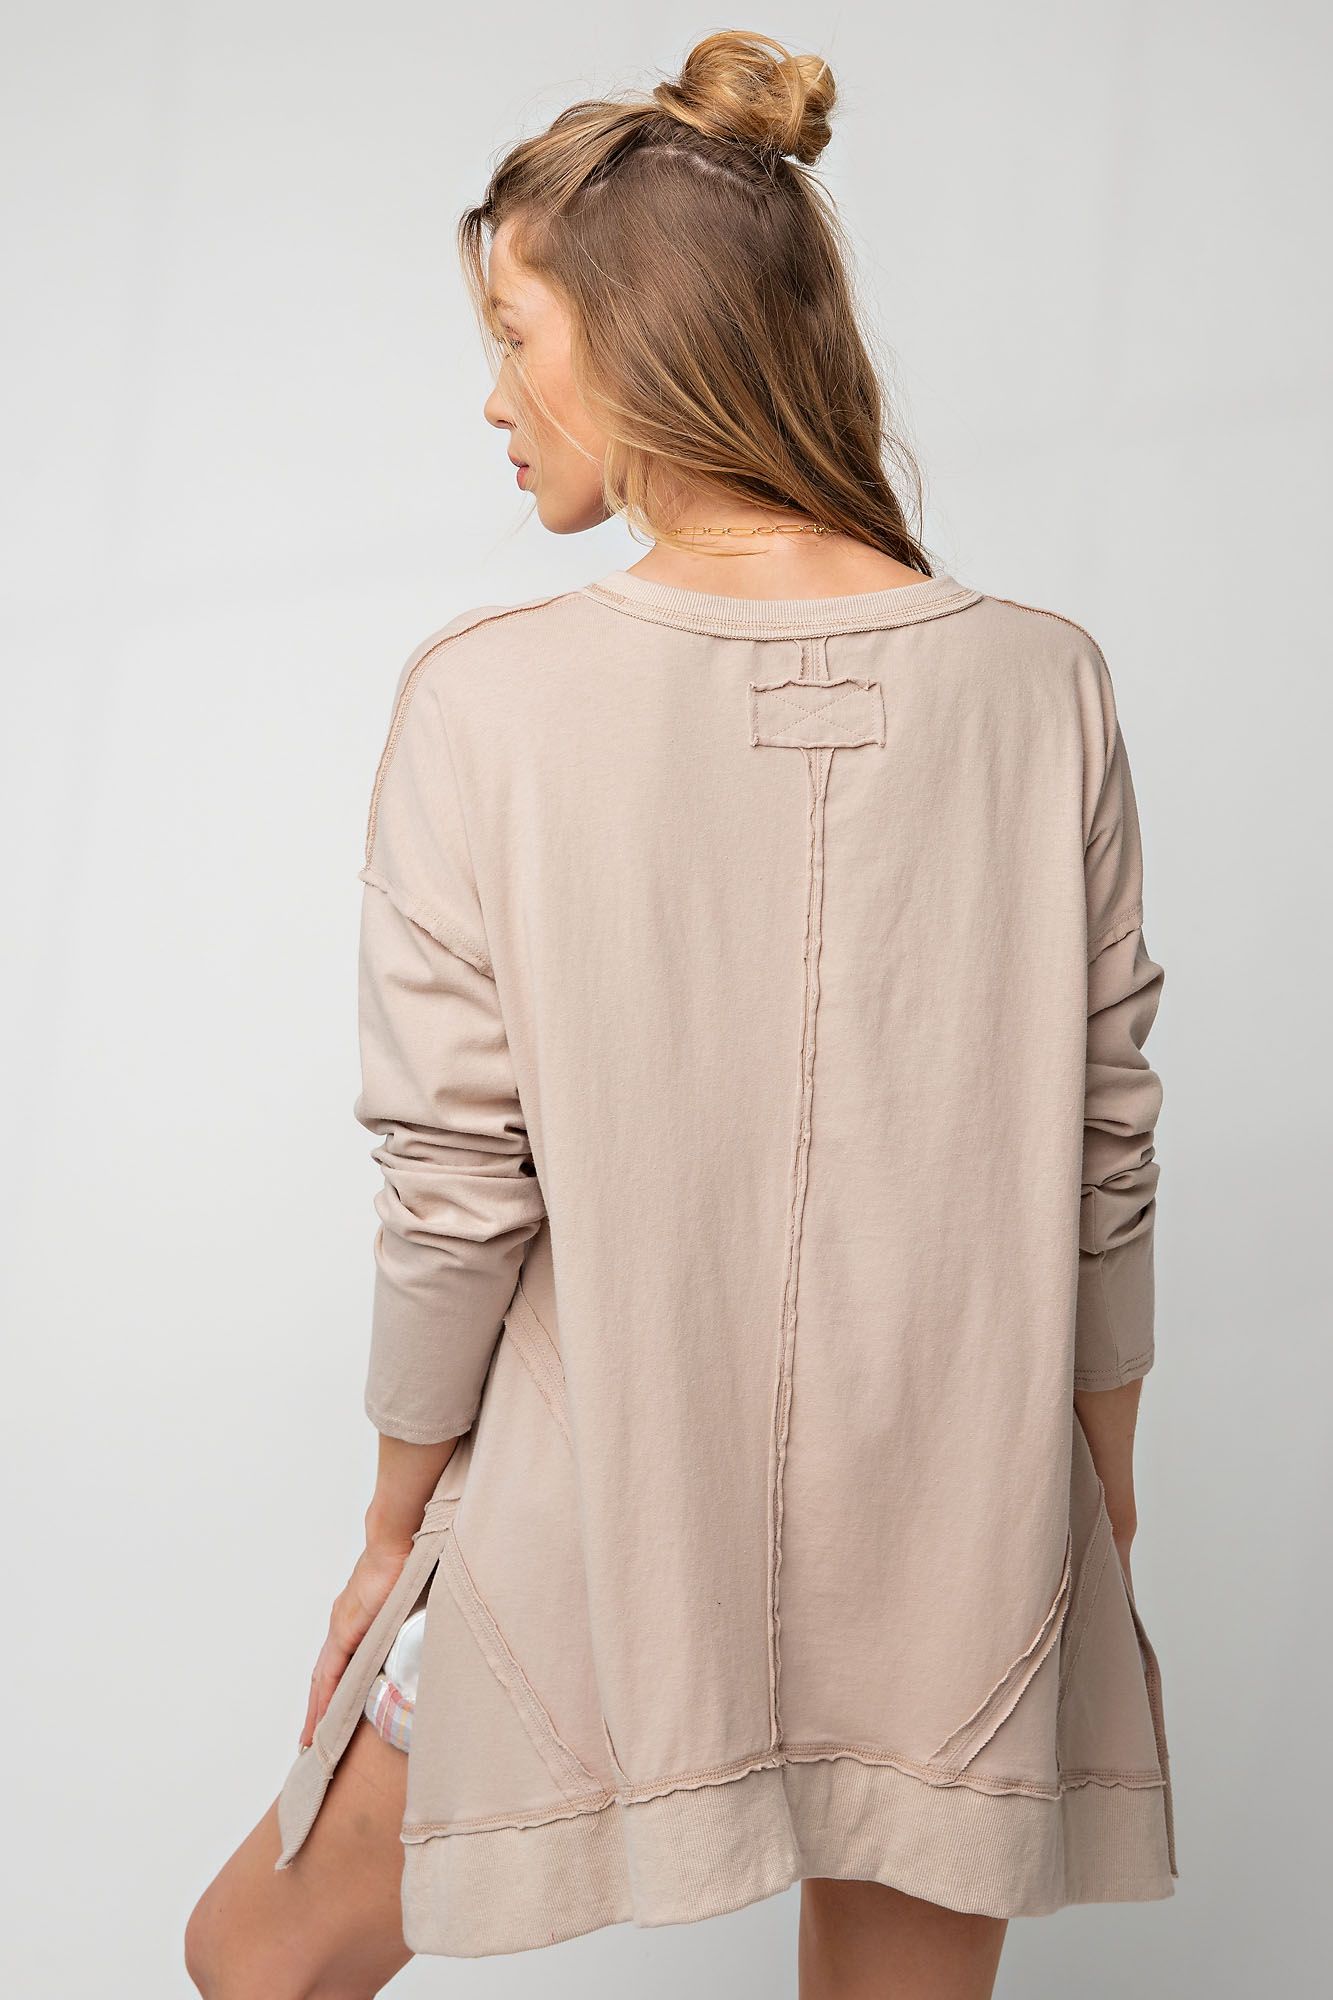 Sharkbite Hem Tunic in a size small(relaxed fit)